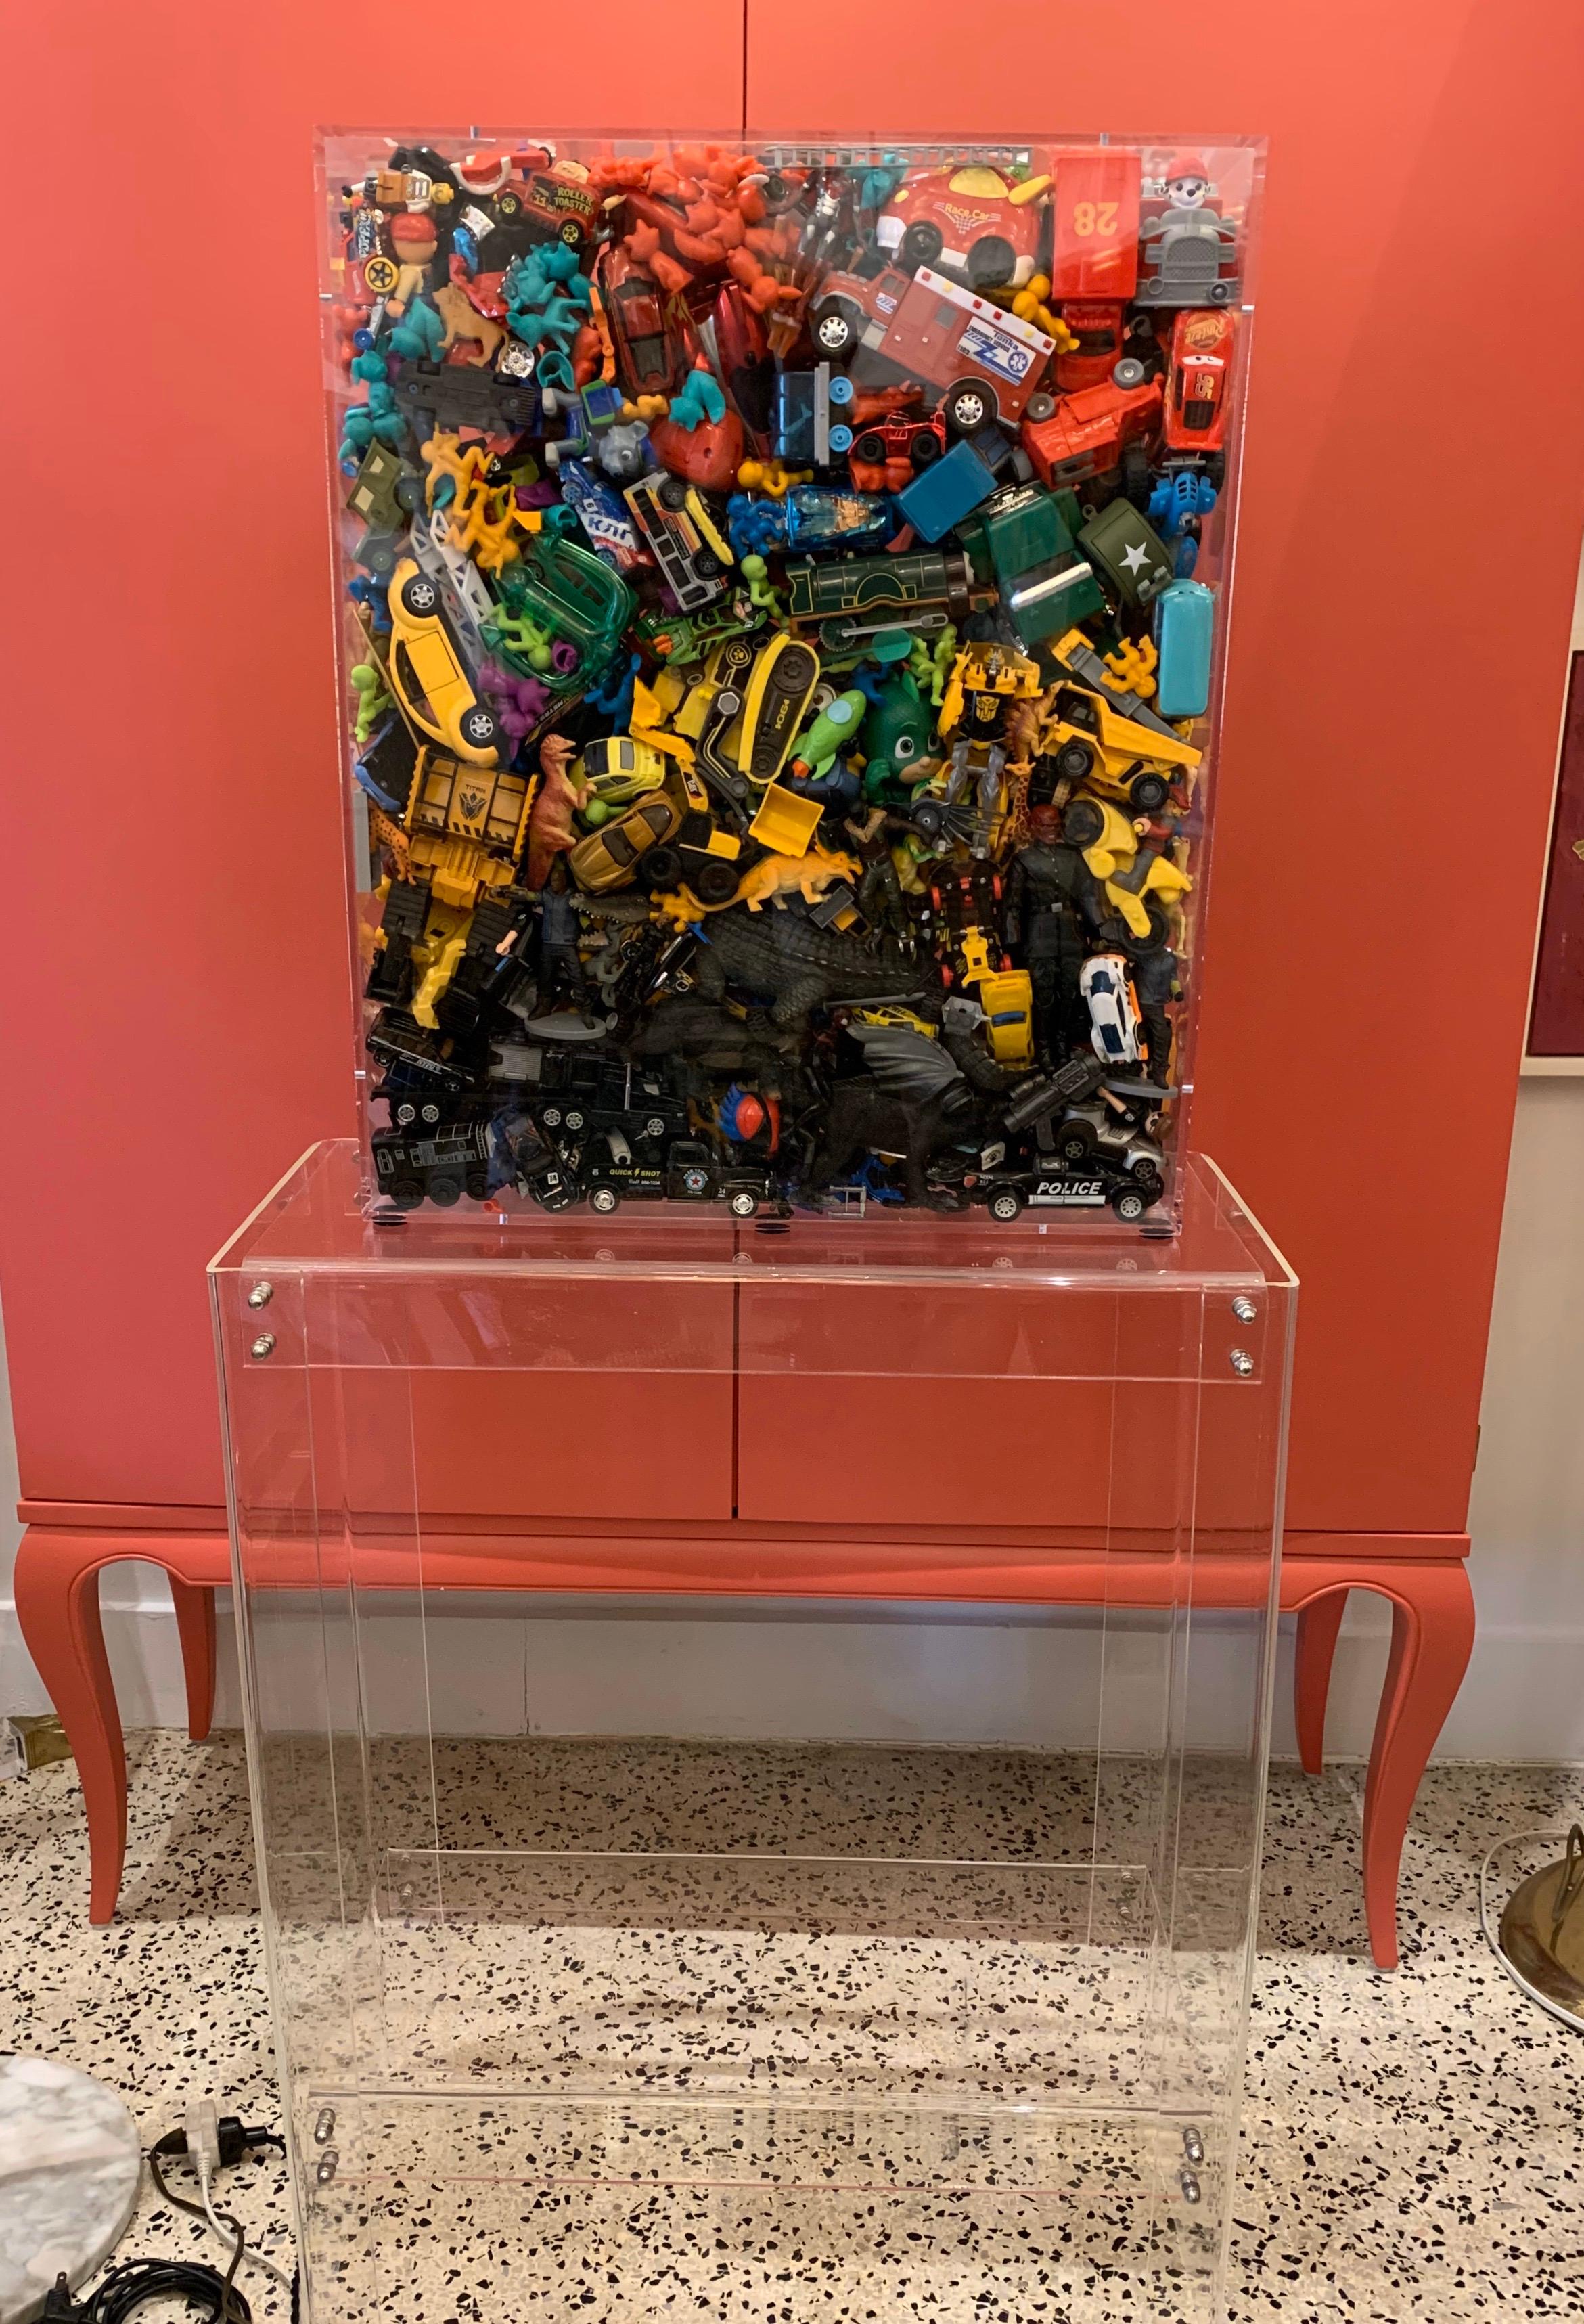 Phenomenal Collection of Toys Encased in a Lucite Box by J. Santamarina For Sale 2